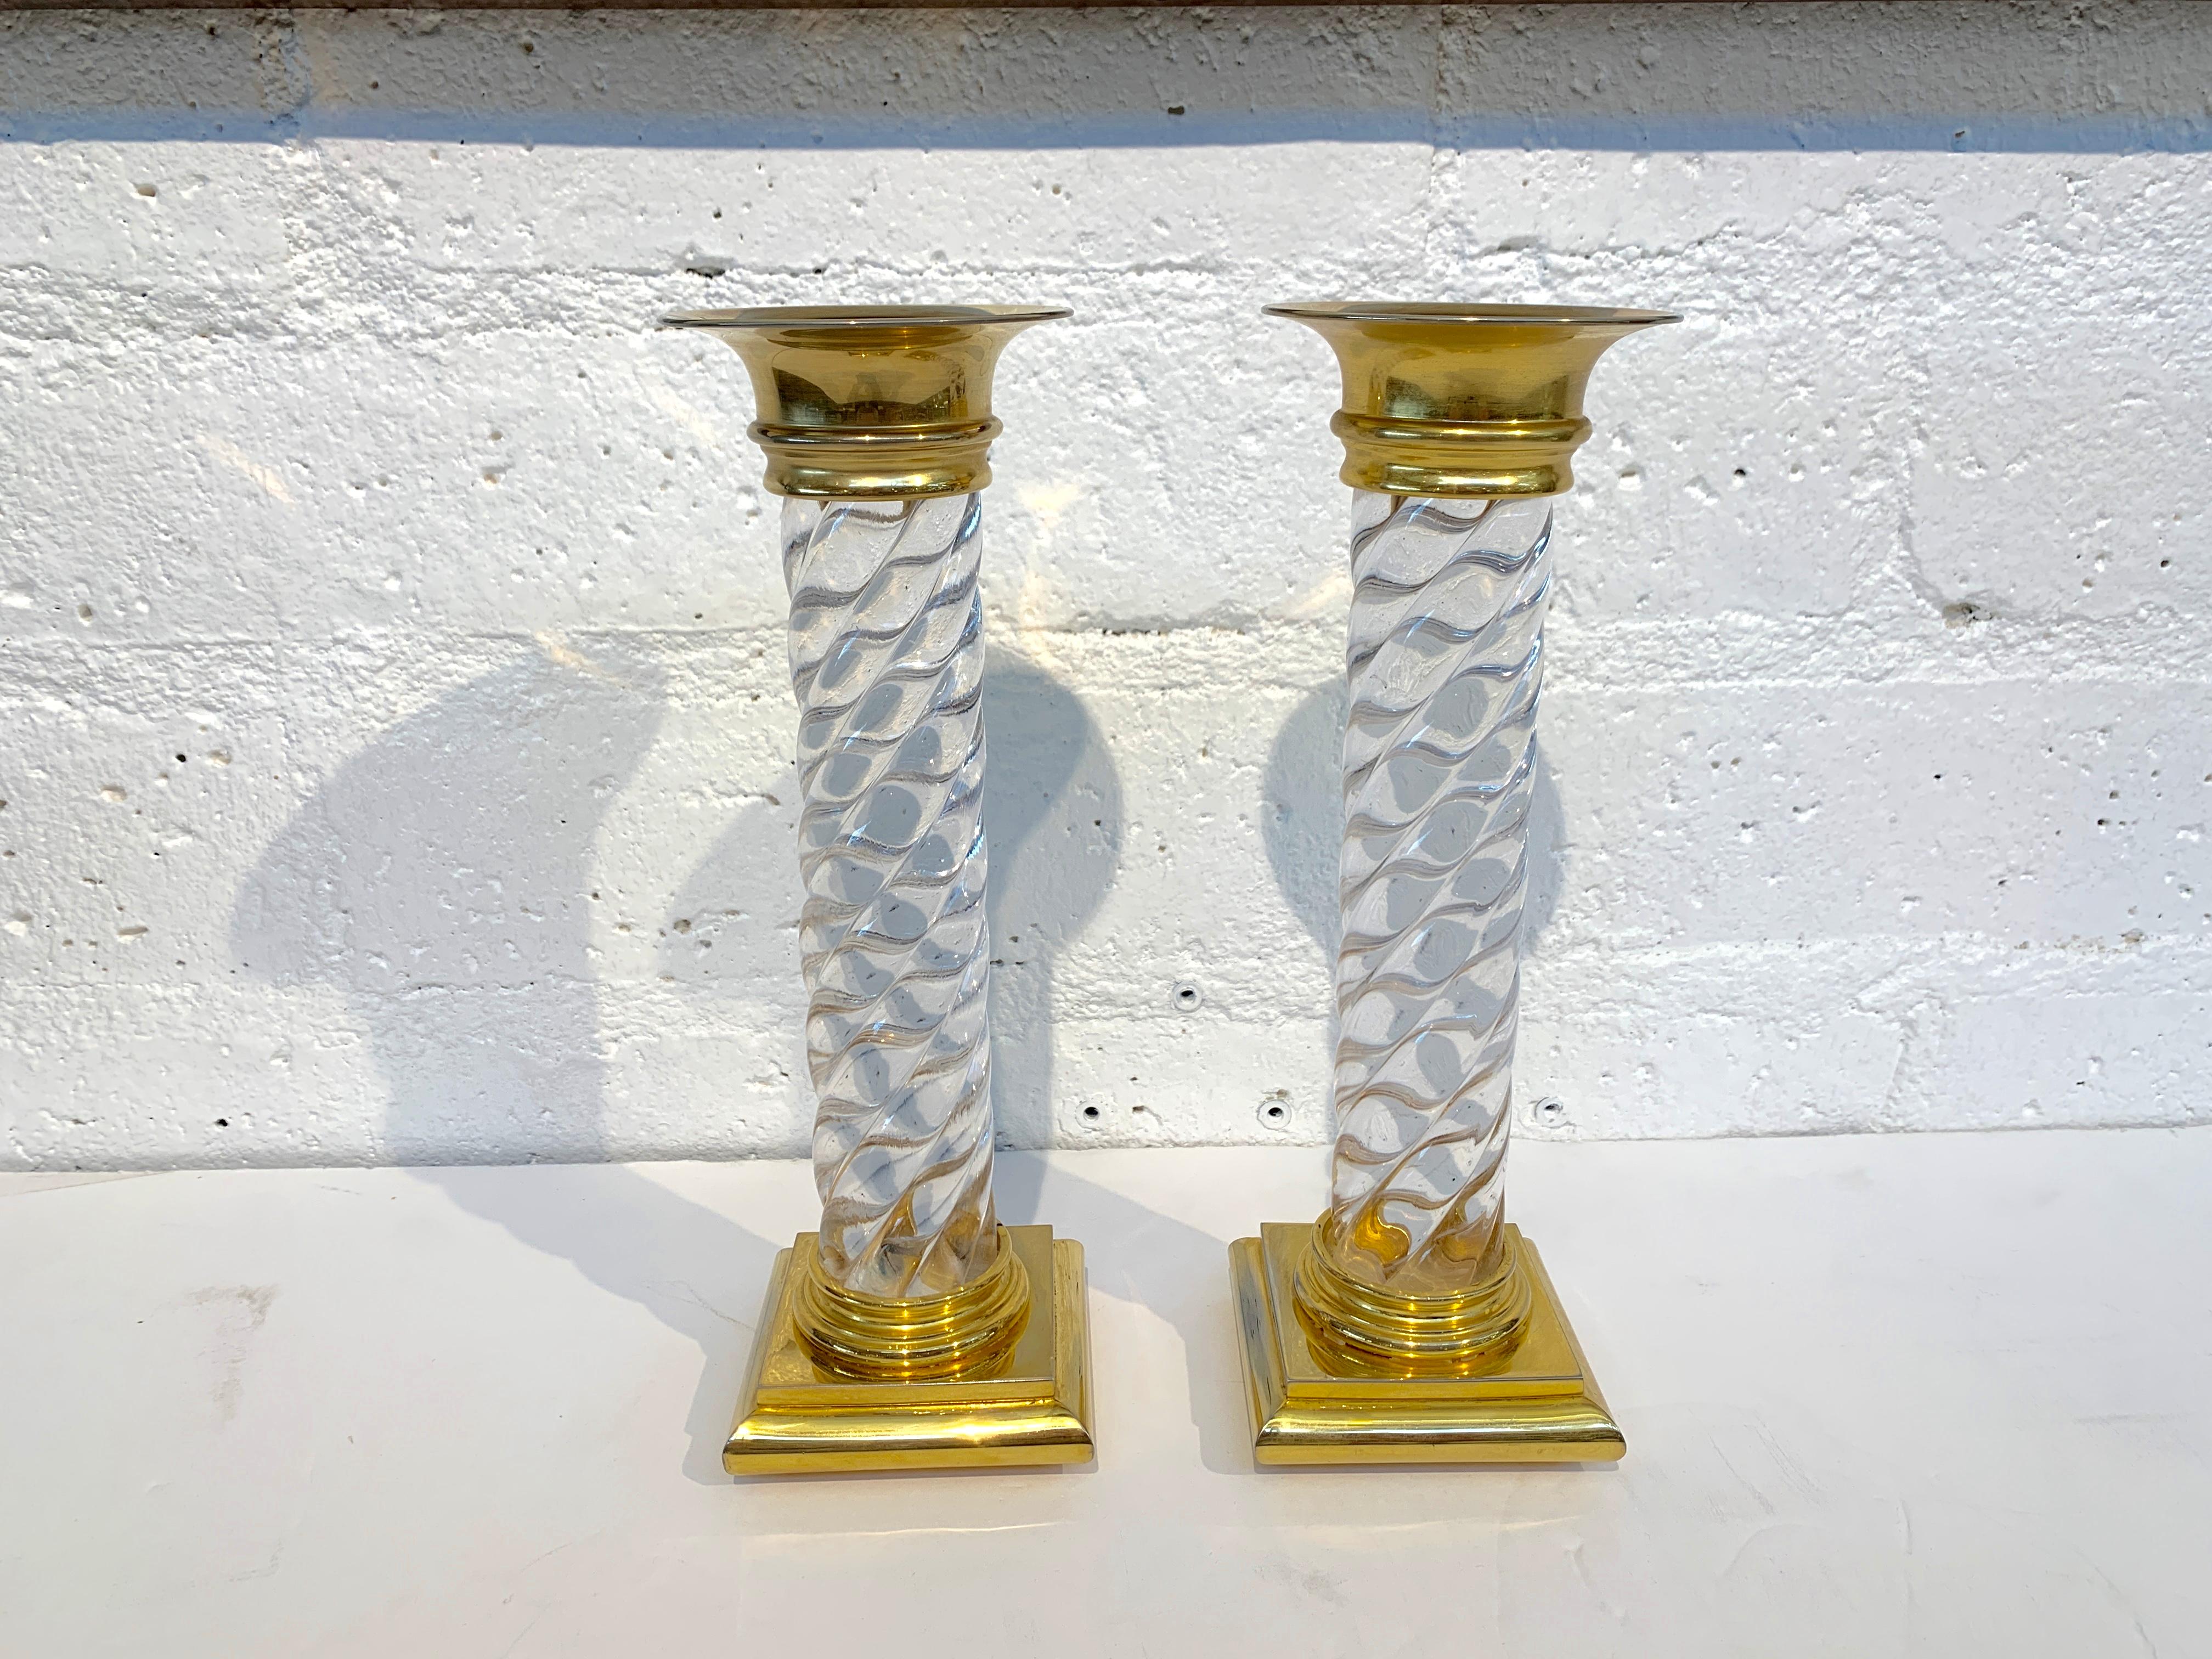 A pretty pair of glass or crystal candlesticks with brass or ormolu mounts. The glass or crystal portions are in good condition the mounts have wear and the interior parts wear the candles go in are scratched, please see the detailed photos. I